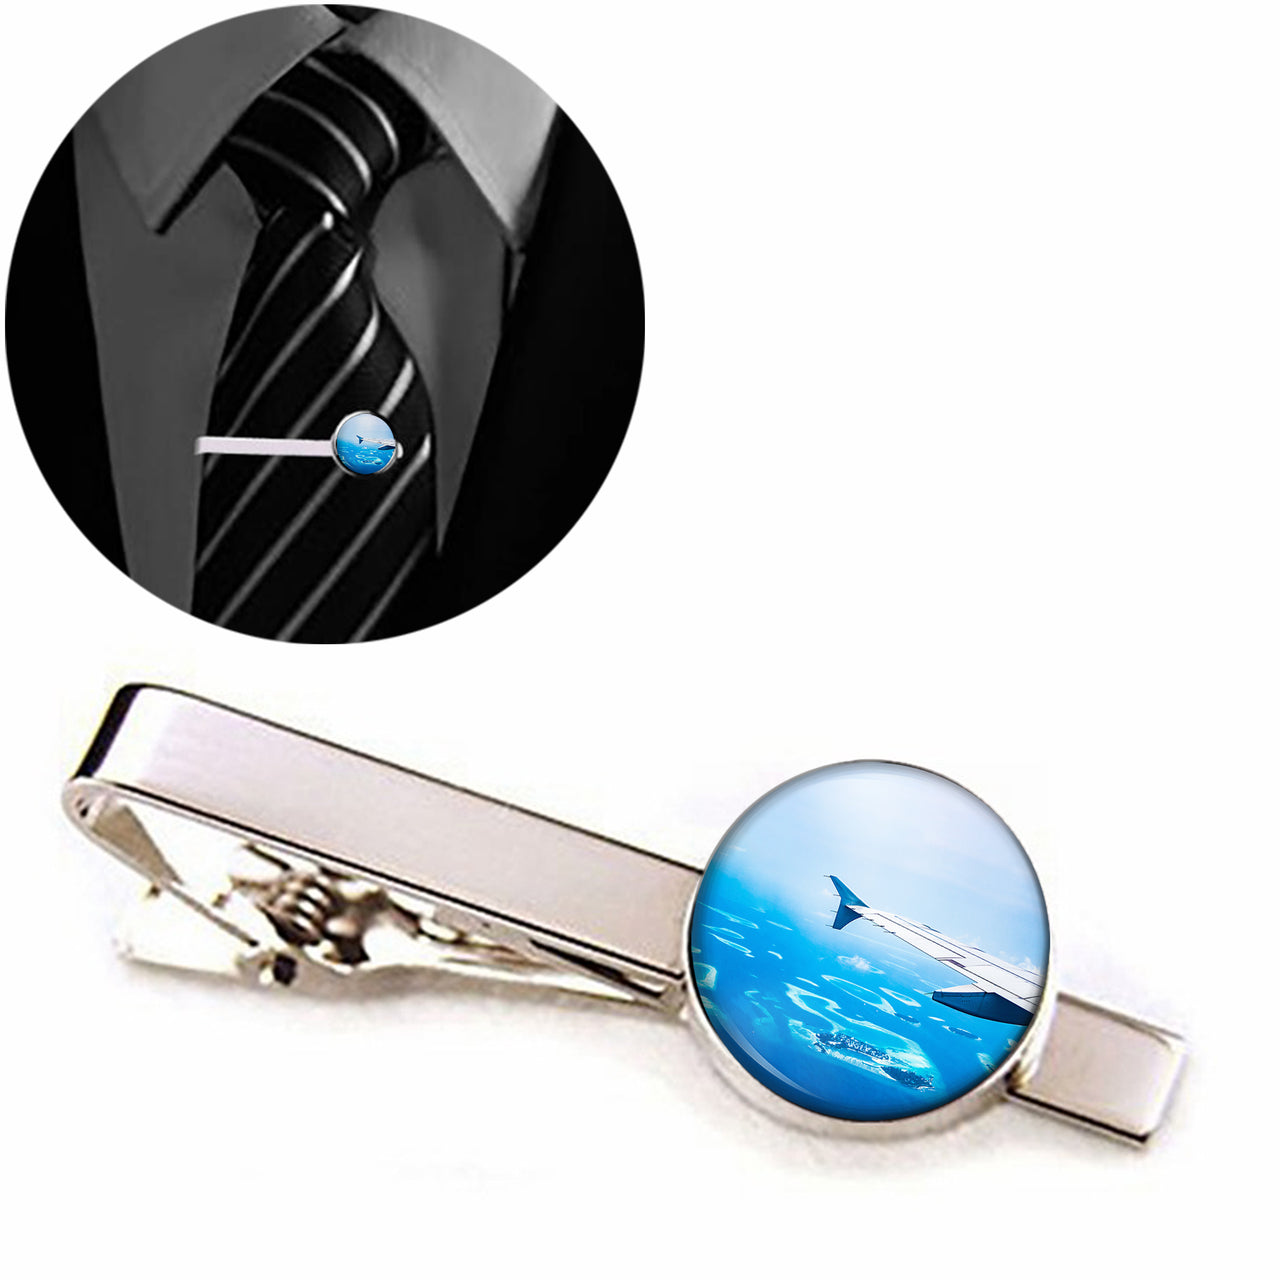 Outstanding View Through Airplane Wing Designed Tie Clips